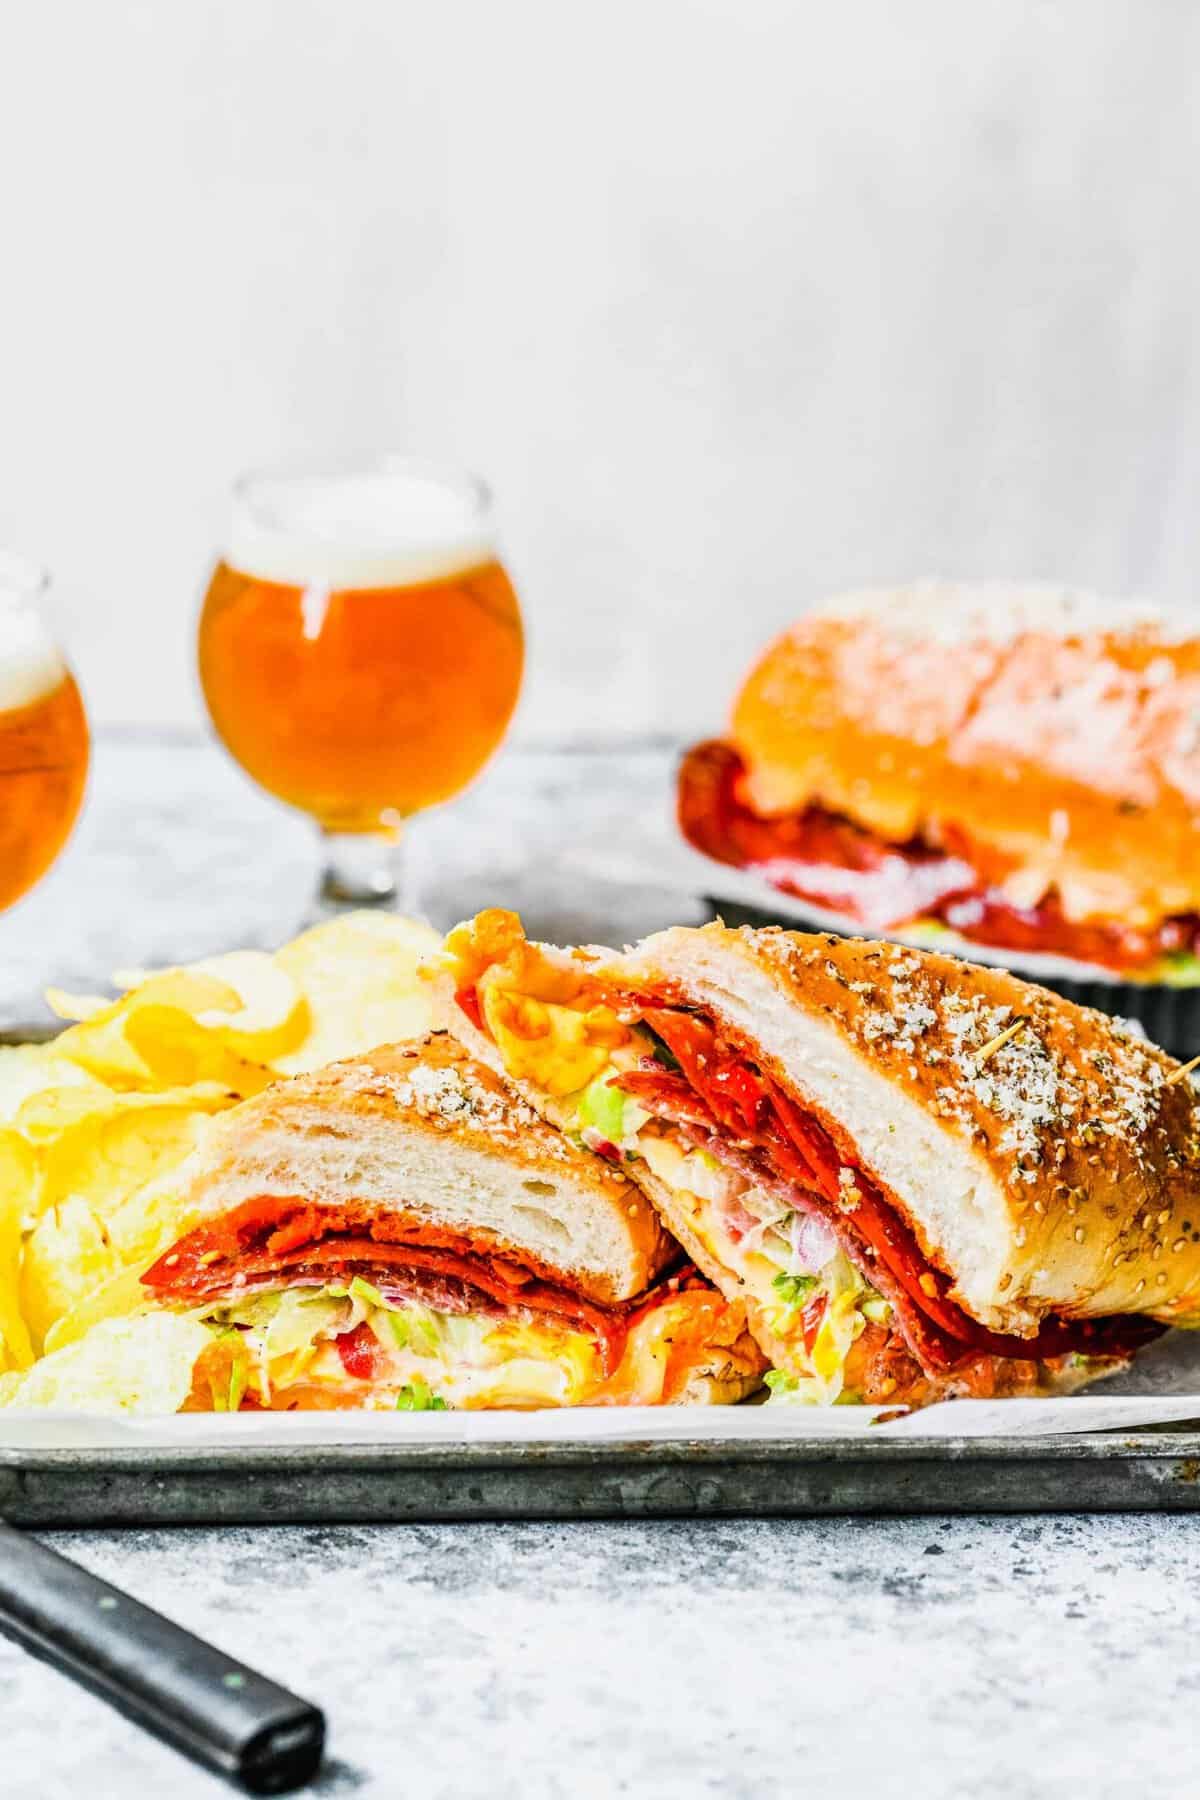 A plate with a grinder sandwich cut in half, with two glasses of beer and a second sandwich in the background